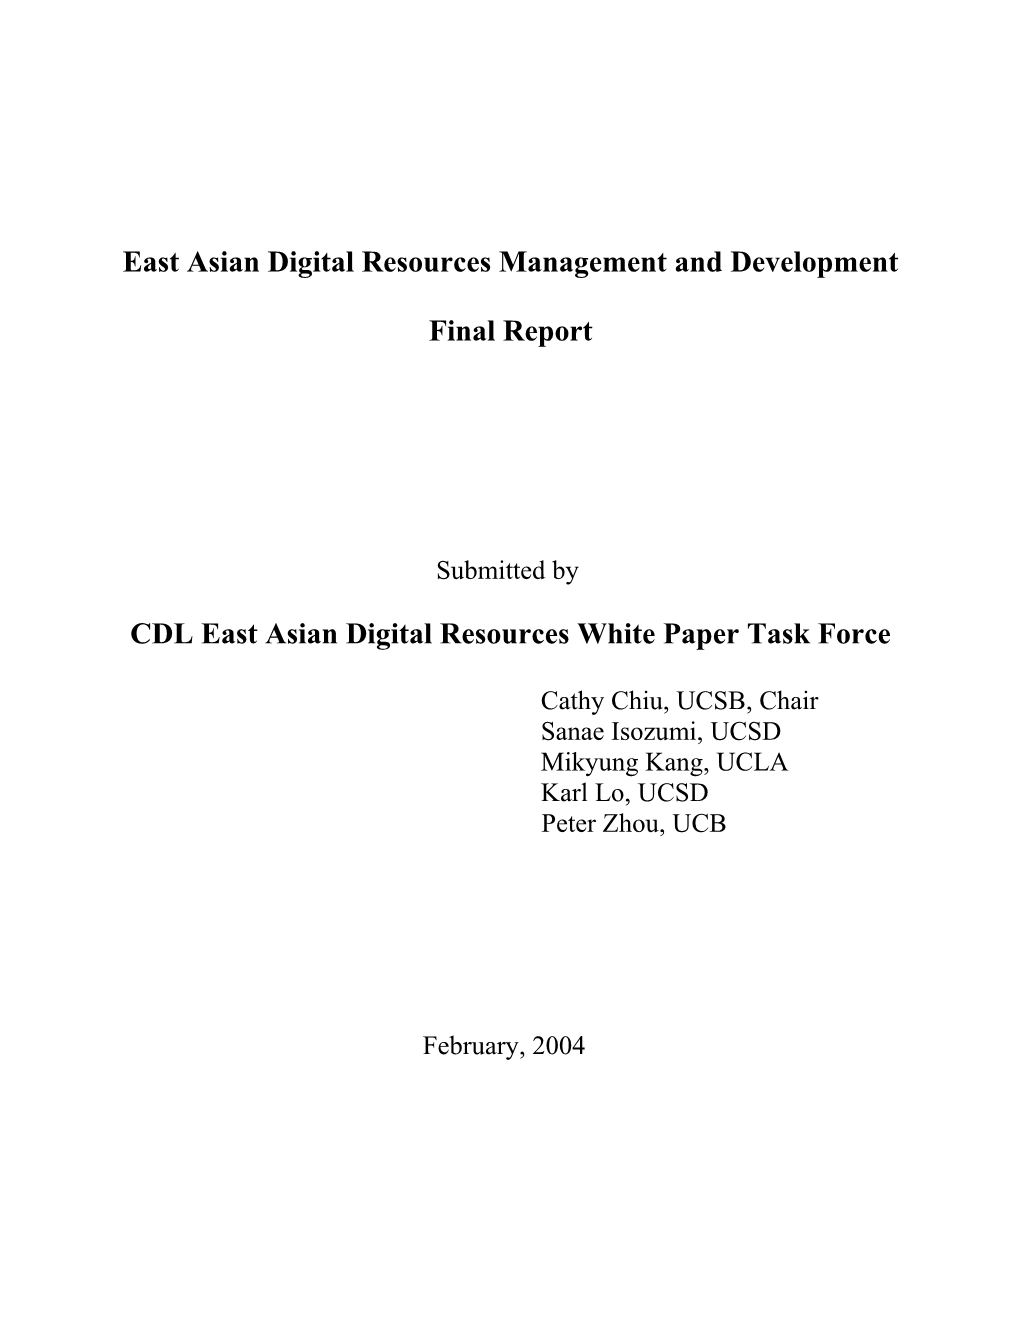 Developing East Asian Digital Collections: a Case Statement